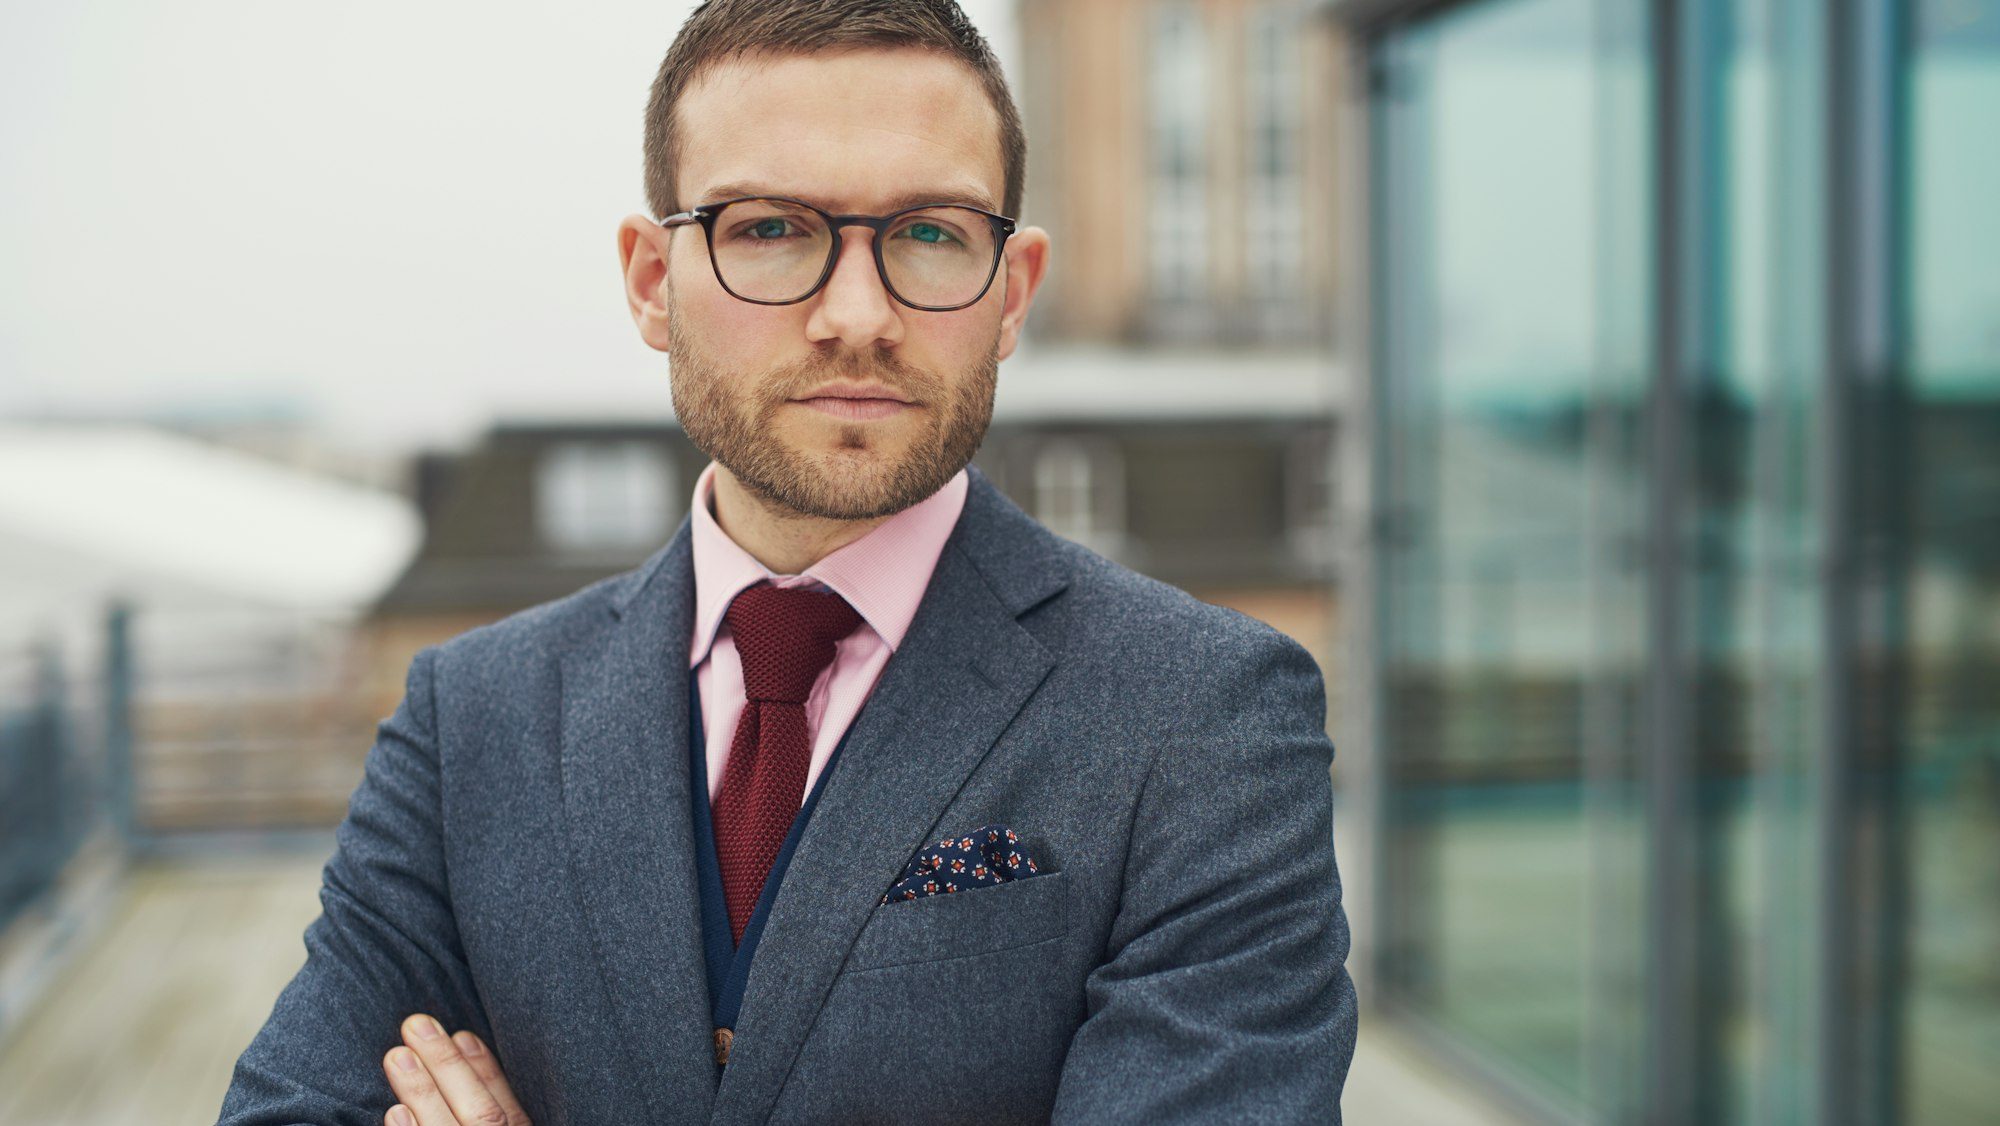 Confident businessman standing outside office